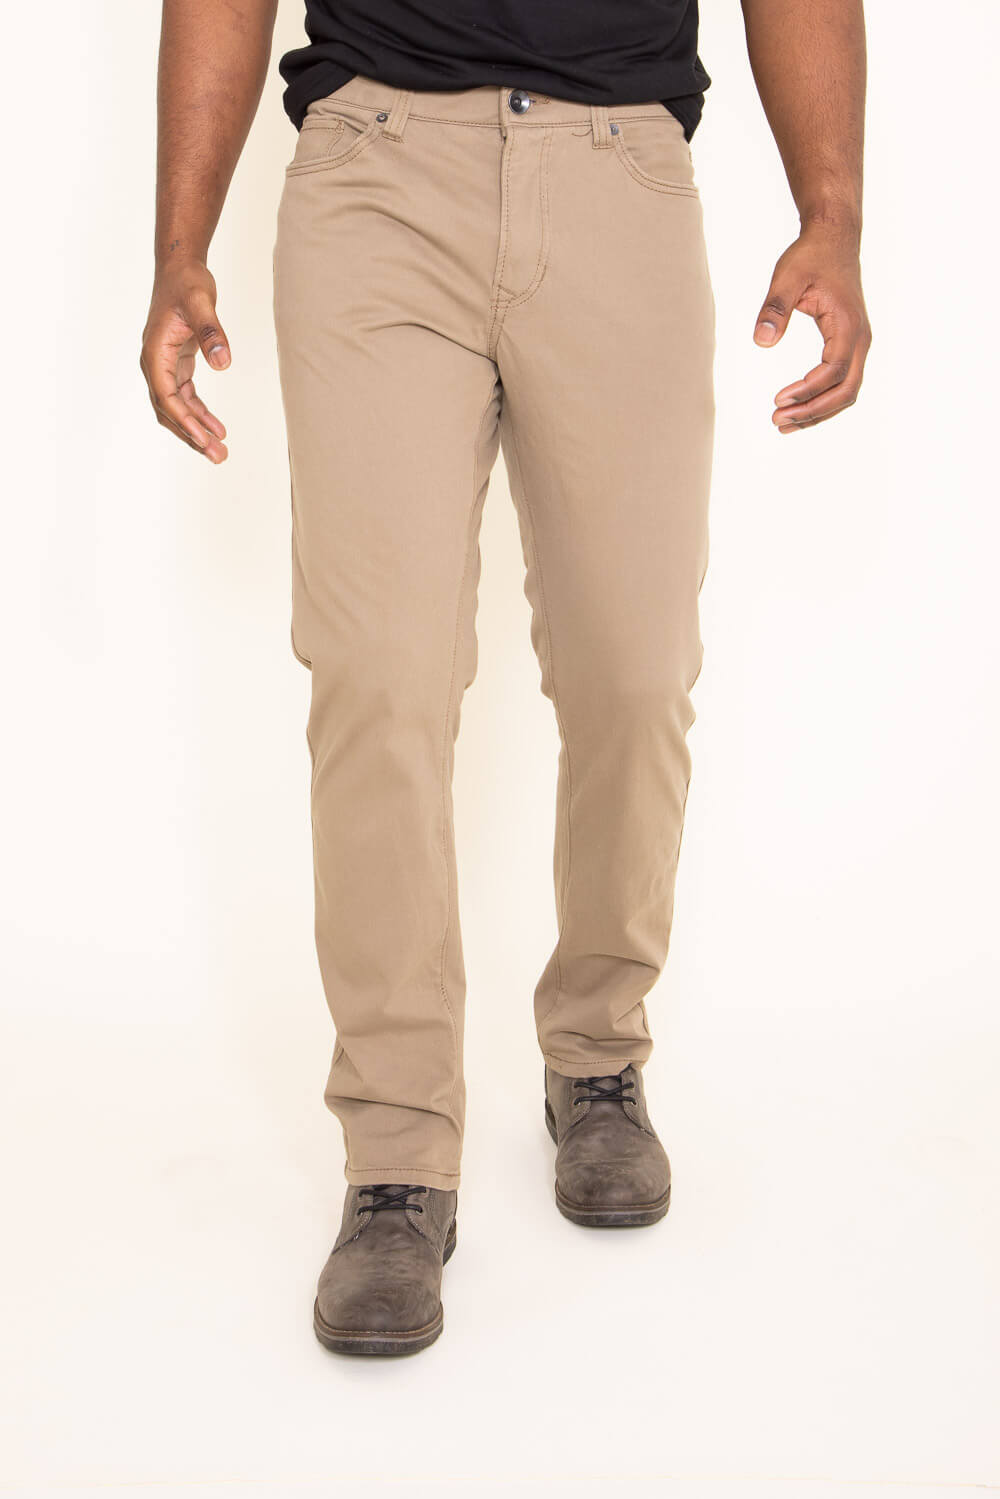 Claret Cotton Twill Trousers - Roderick Charles